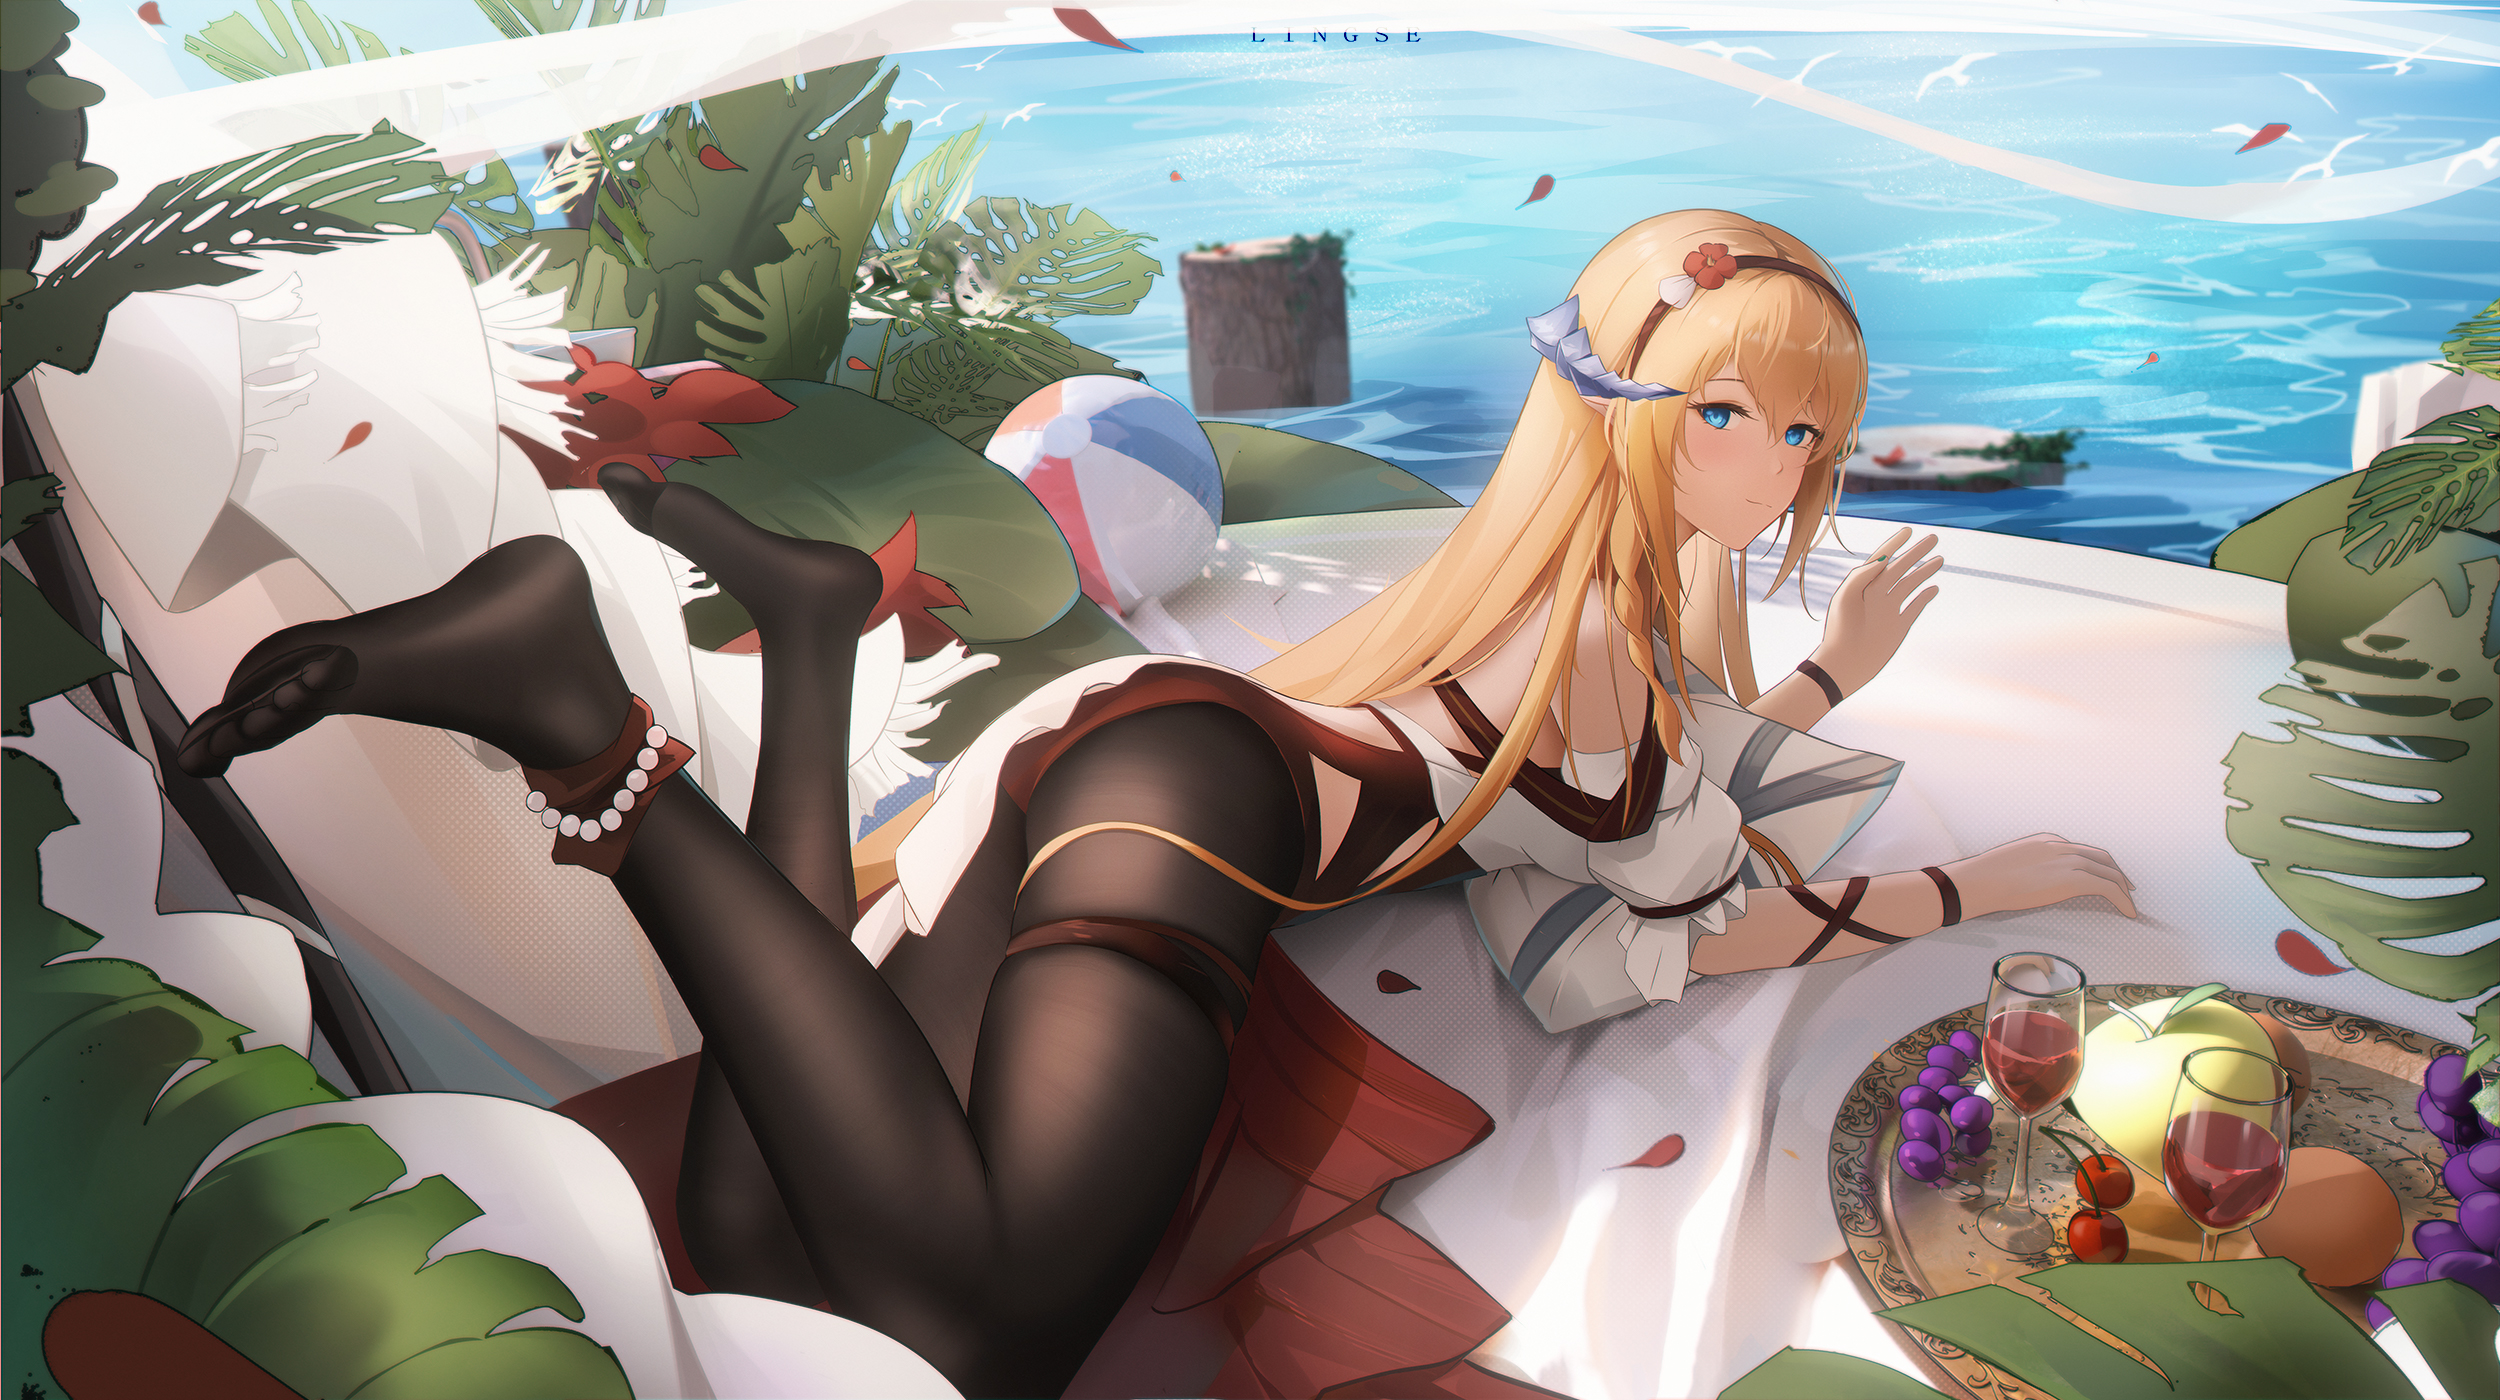 Anime 2500x1400 anime anime girls lying down lying on front pantyhose fruit wine glass wine glass water looking at viewer long hair feet blonde blue eyes leaves beach ball cherries grapes petals flower in hair